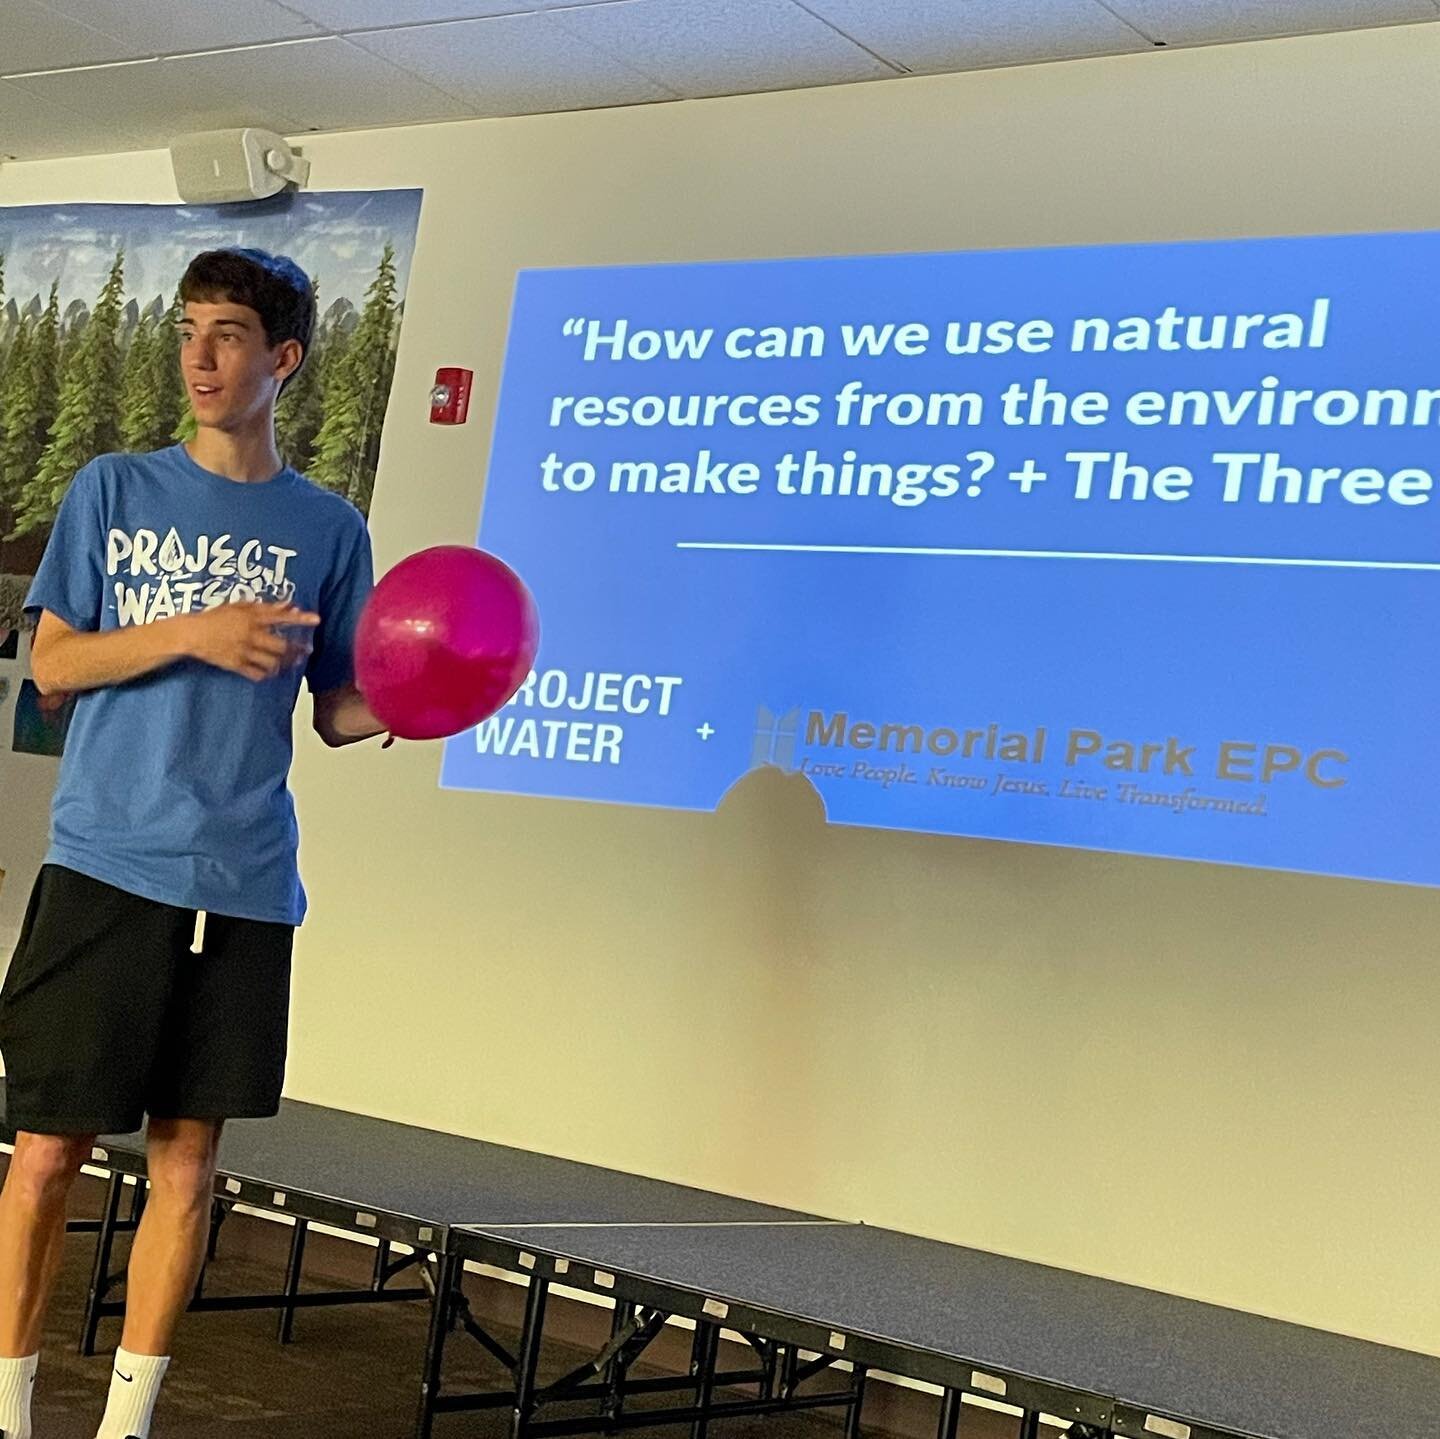 Project Water volunteers Tyler Vargo, Graham Wolfe, and Claire Majerac have been busy this summer teaching STEM at camp.

At Memorial Park Church in Allison Park, we engaged with kids aged 7-12 as we taught their science elective.  Kids learned about